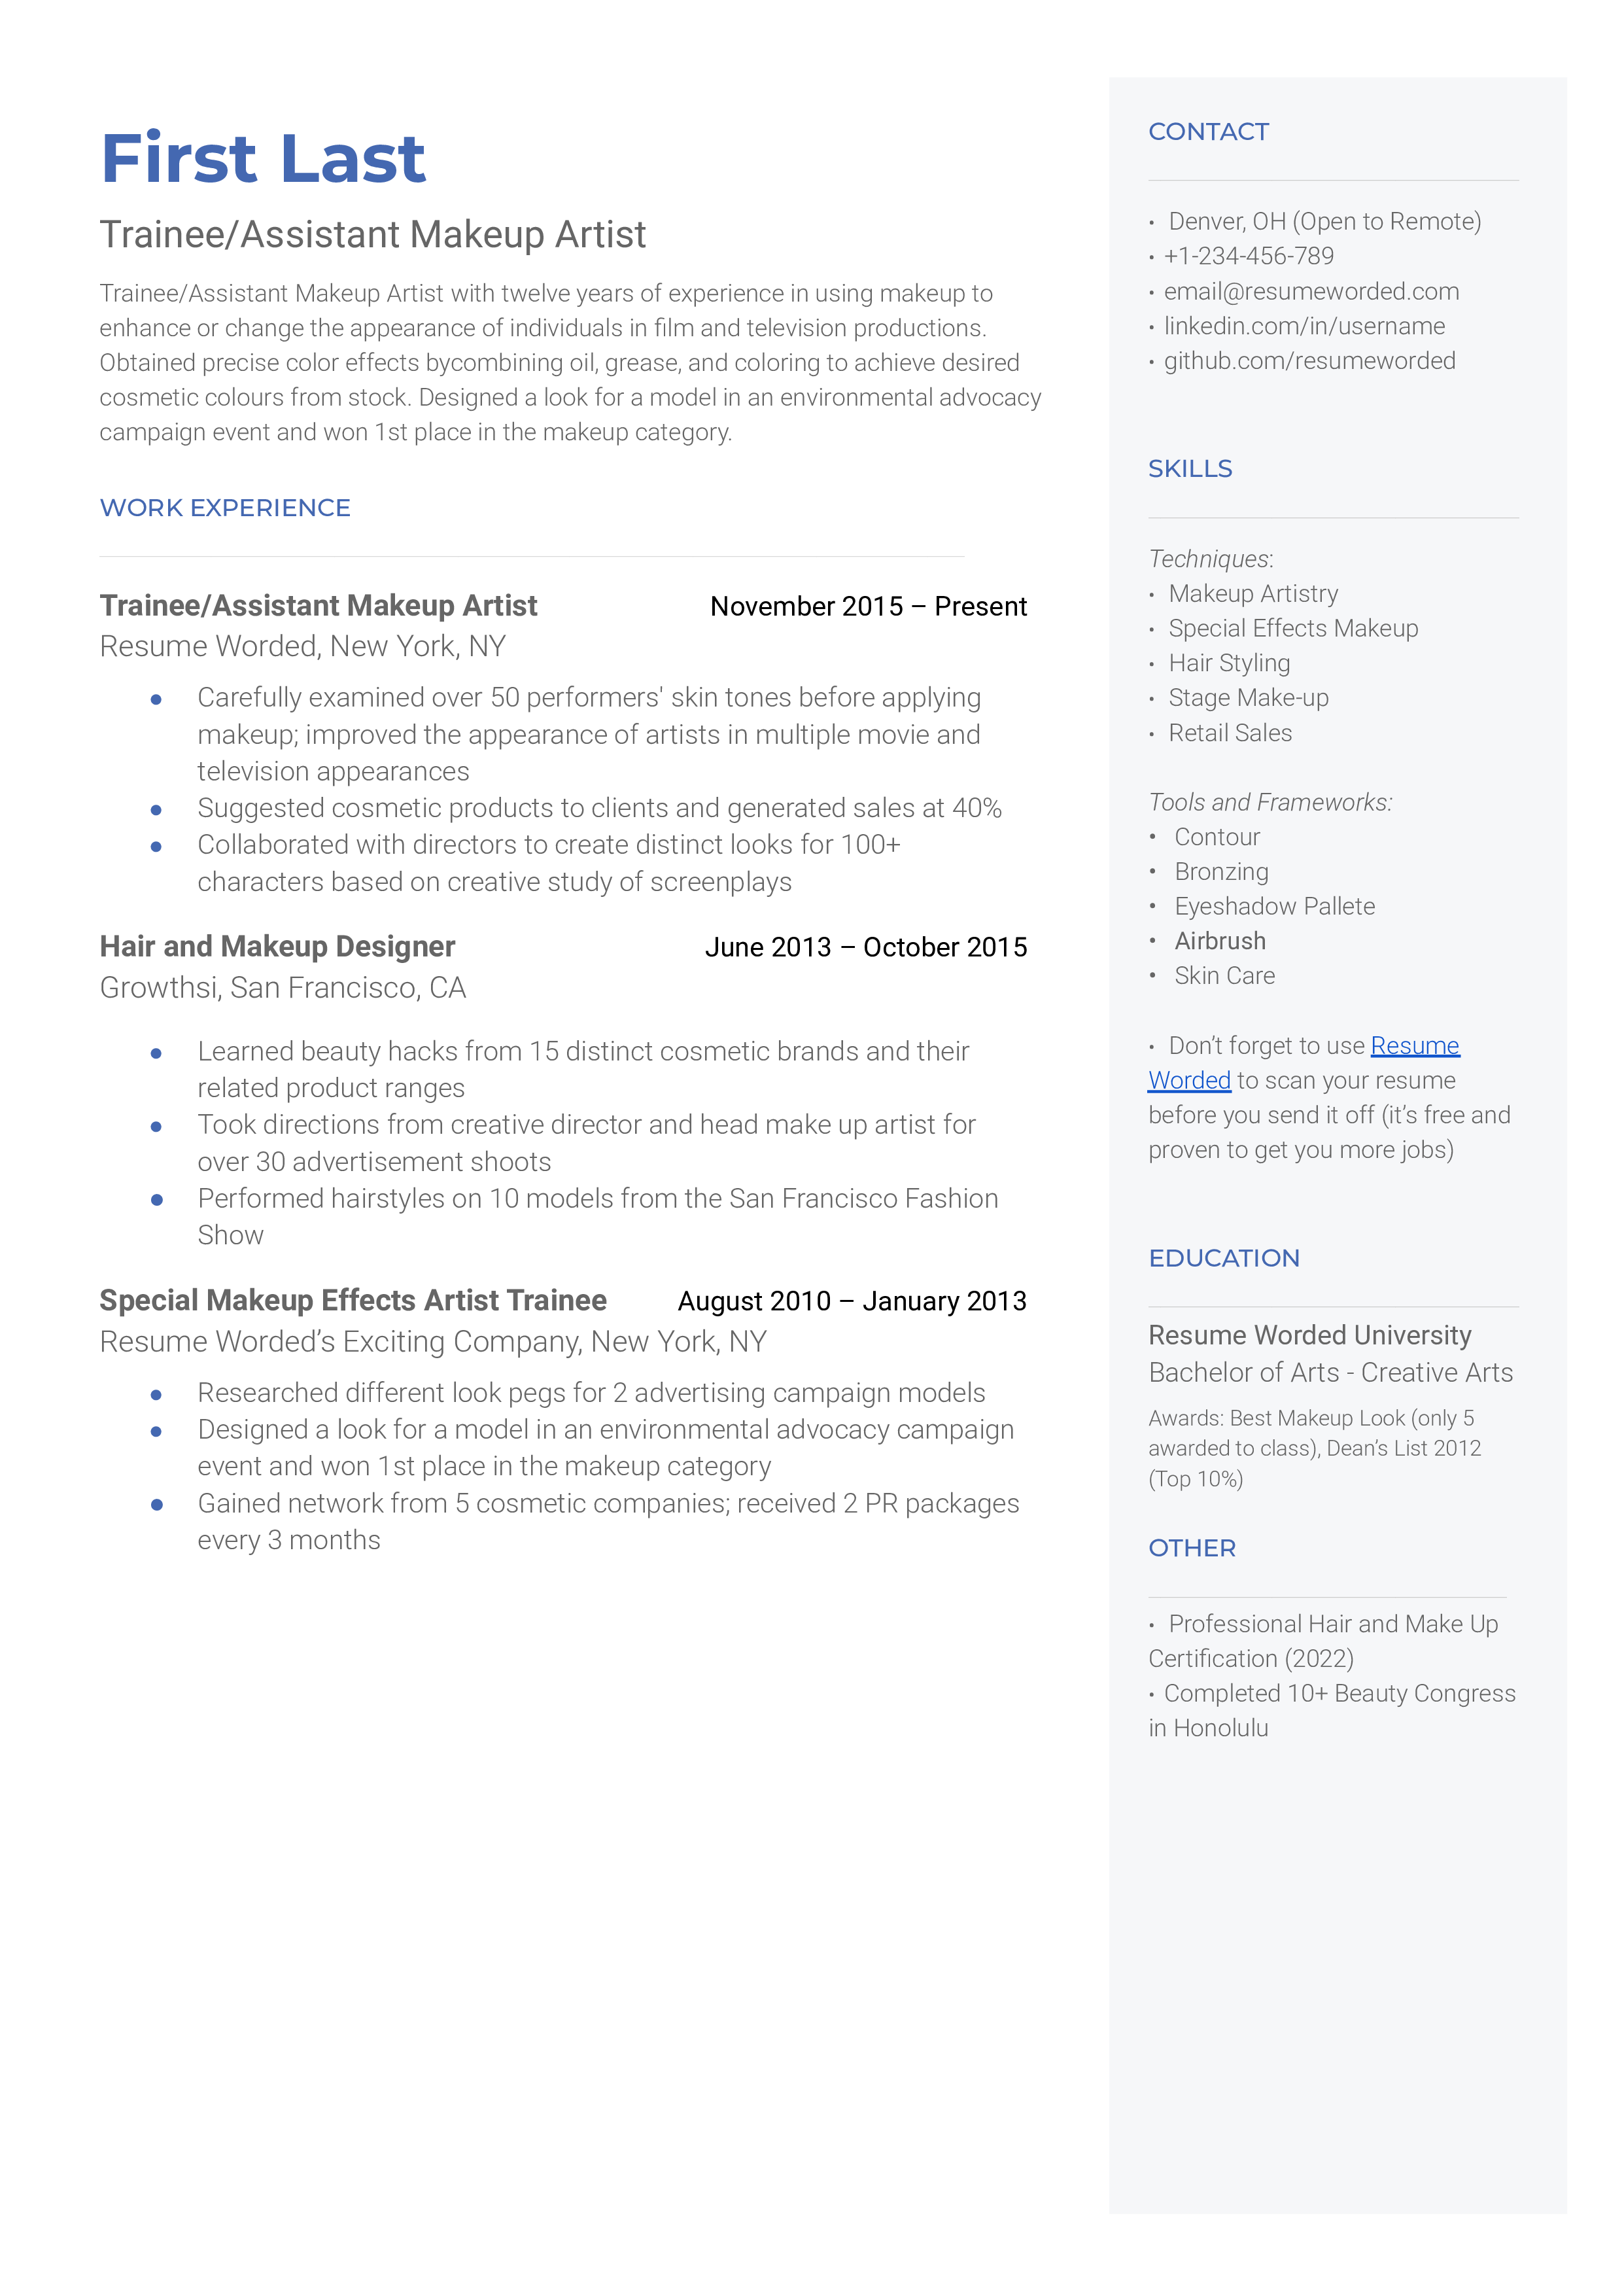 Trainee/Assistant Makeup Artist Resume Template + Example